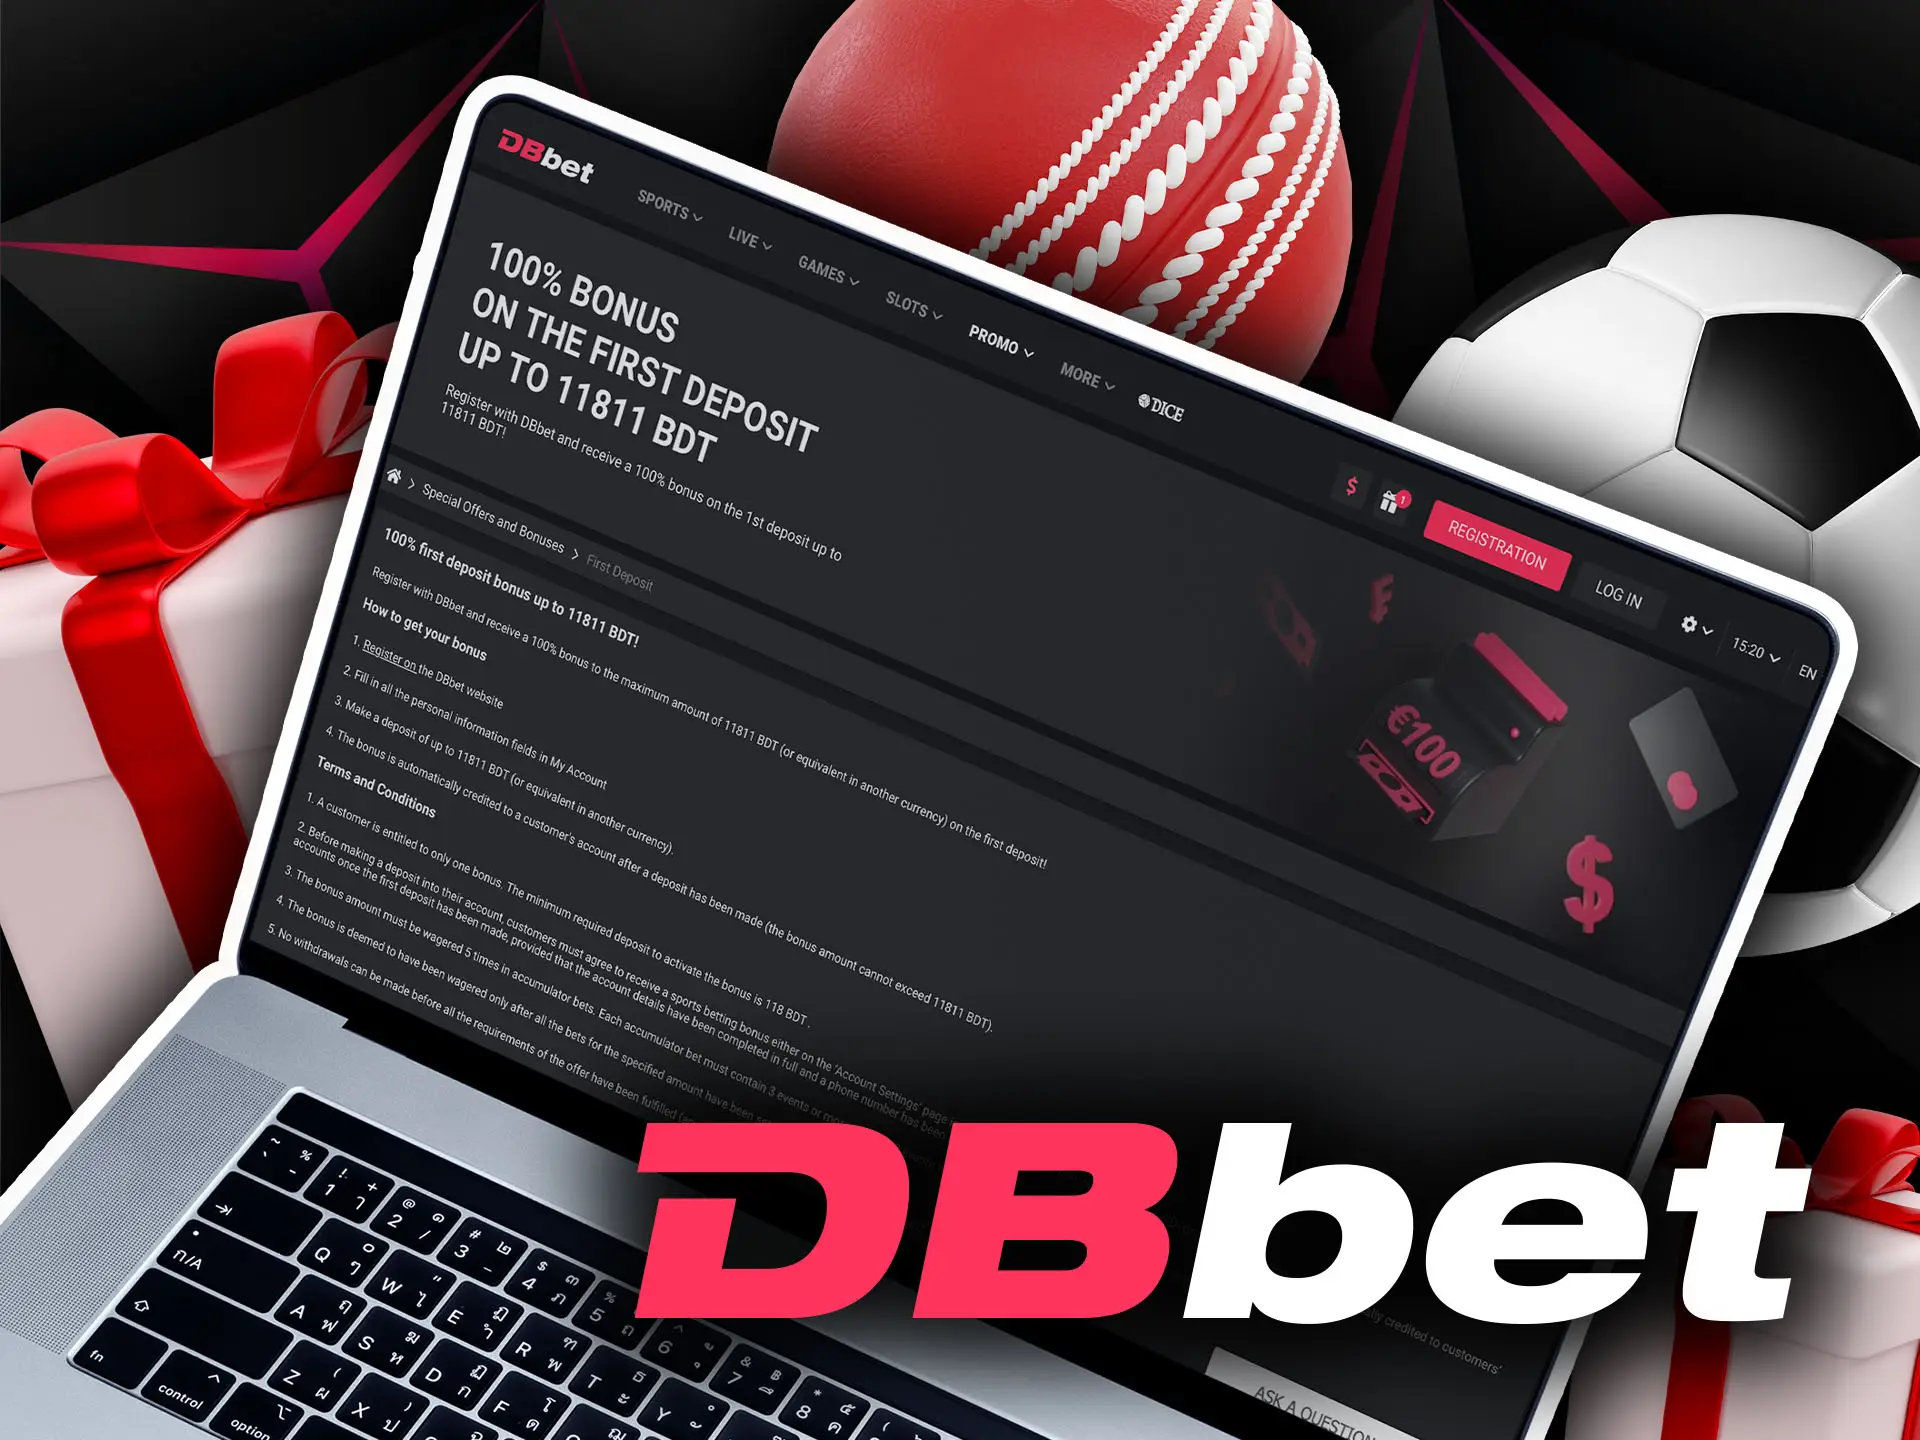 Receive 100% on your first deposit to bet on sports.